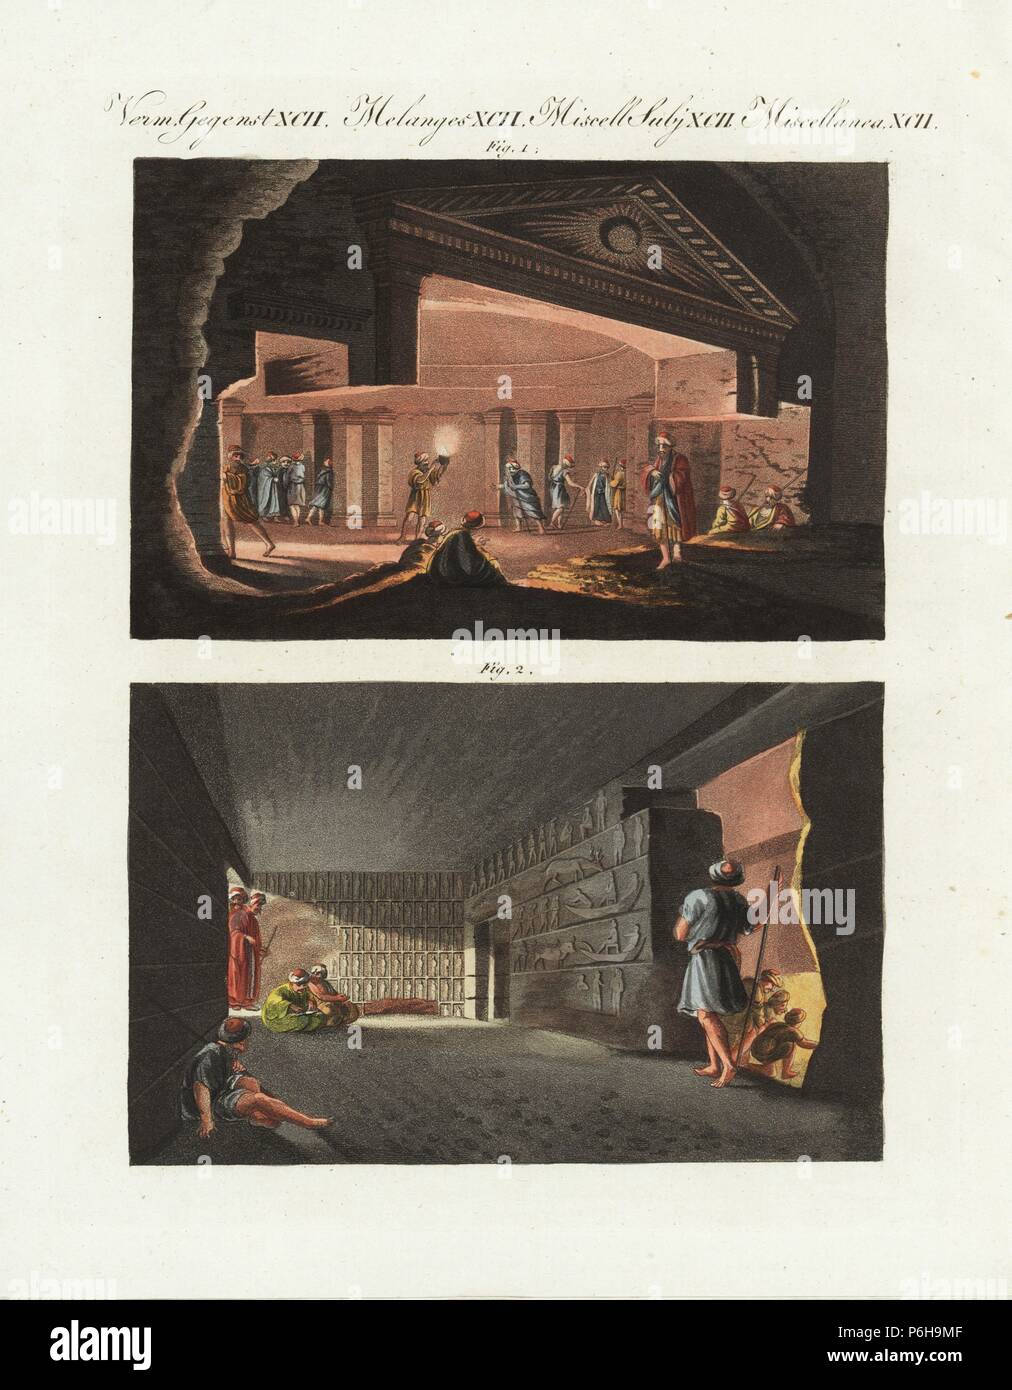 The Egyptian catacombs in Alexandria 1, and room with wall paintings under the pyramid of Giza 2. Handcoloured copperplate engraving from Bertuch's 'Bilderbuch fur Kinder' (Picture Book for Children), Weimar, 1807. Friedrich Johann Bertuch (1747-1822) was a German publisher and man of arts most famous for his 12-volume encyclopedia for children illustrated with 1,200 engraved plates on natural history, science, costume, mythology, etc., published from 1790-1830. Stock Photo